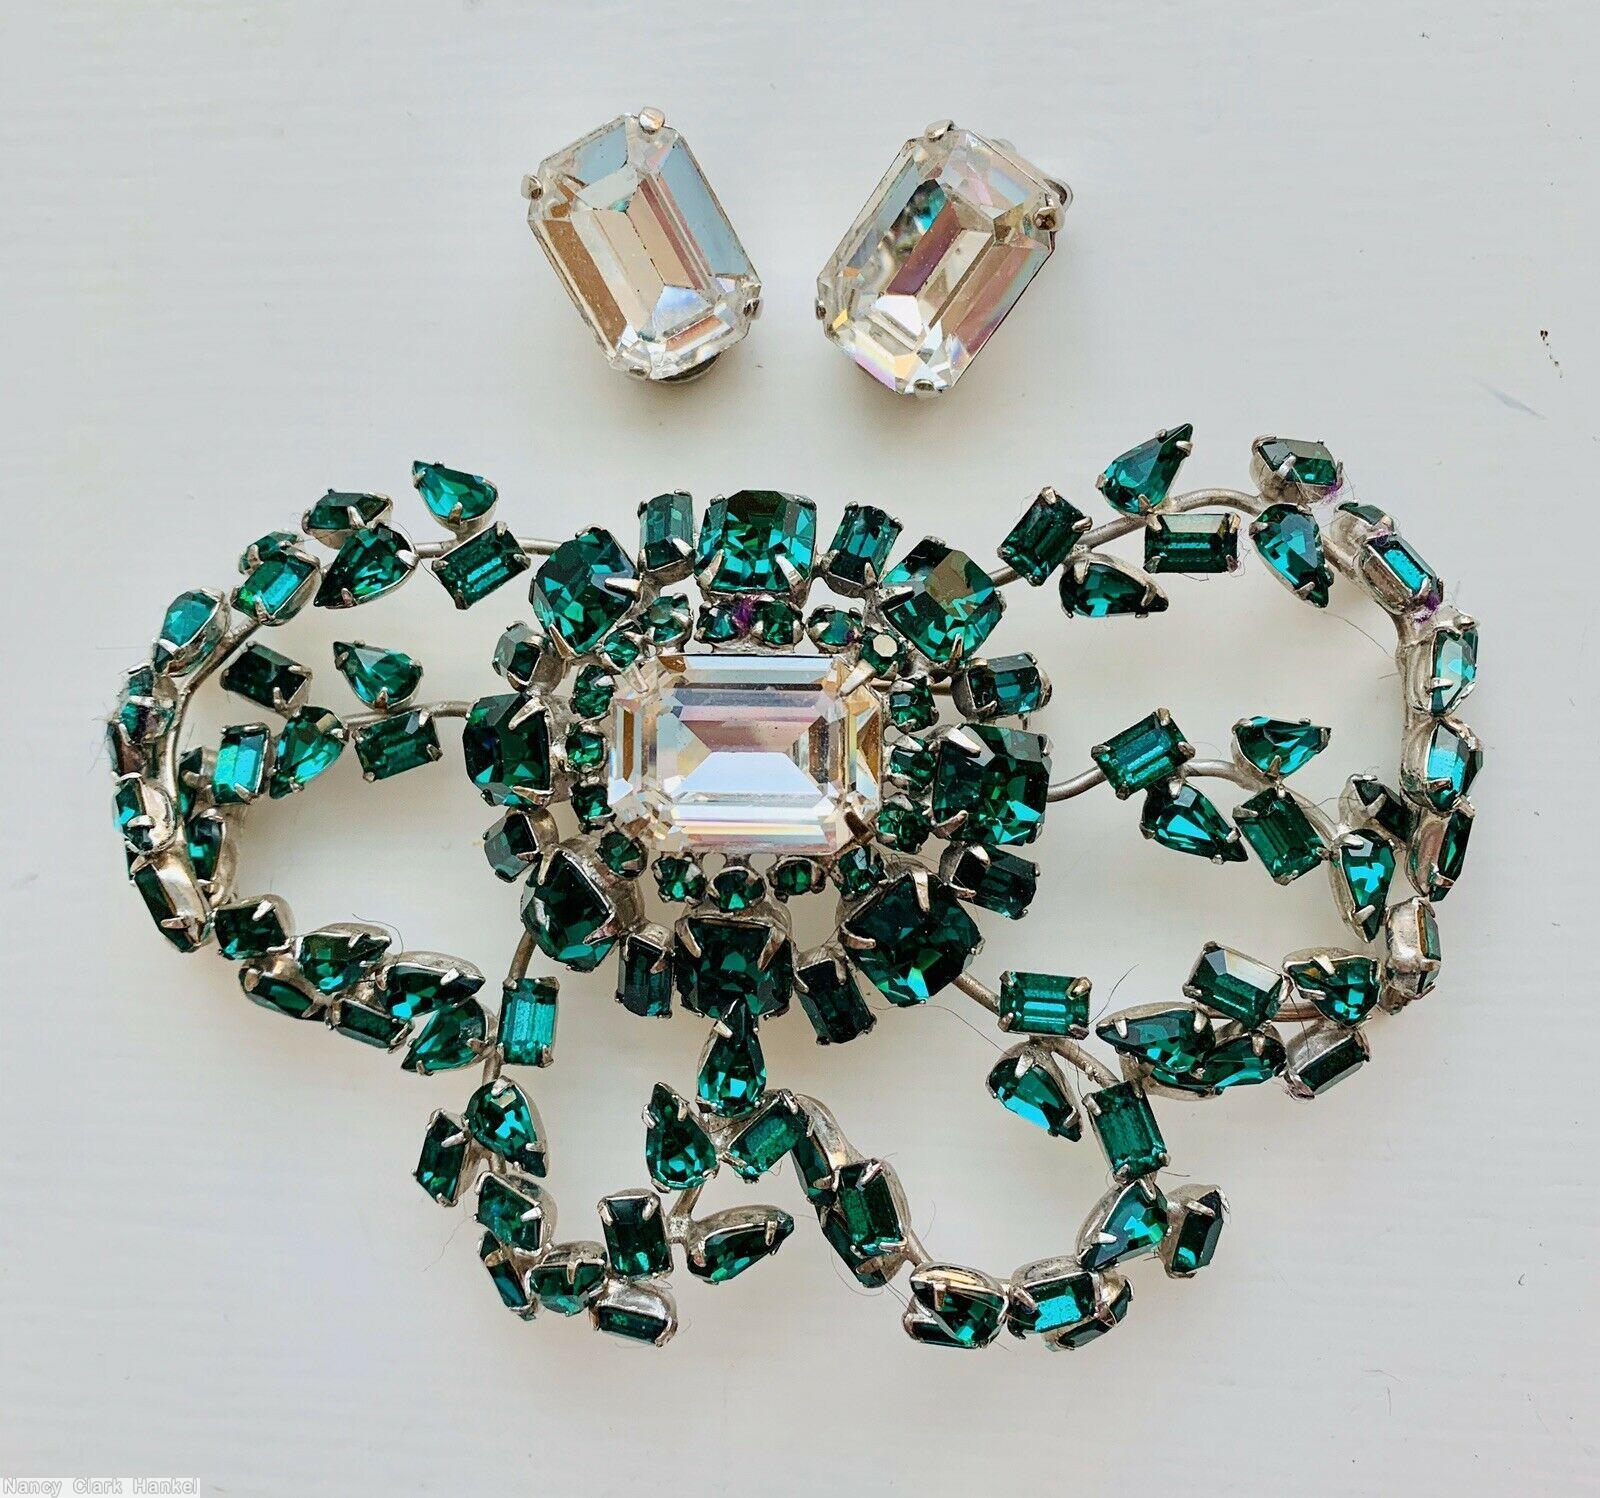 Schreiner 6 sprawling long branch of baguette teardrop domed oval radial pin large emerald cut center 17 surrounding stone 8 large emerald cut 8 baguette green crystal open back emerald cut center silvertone jewelry